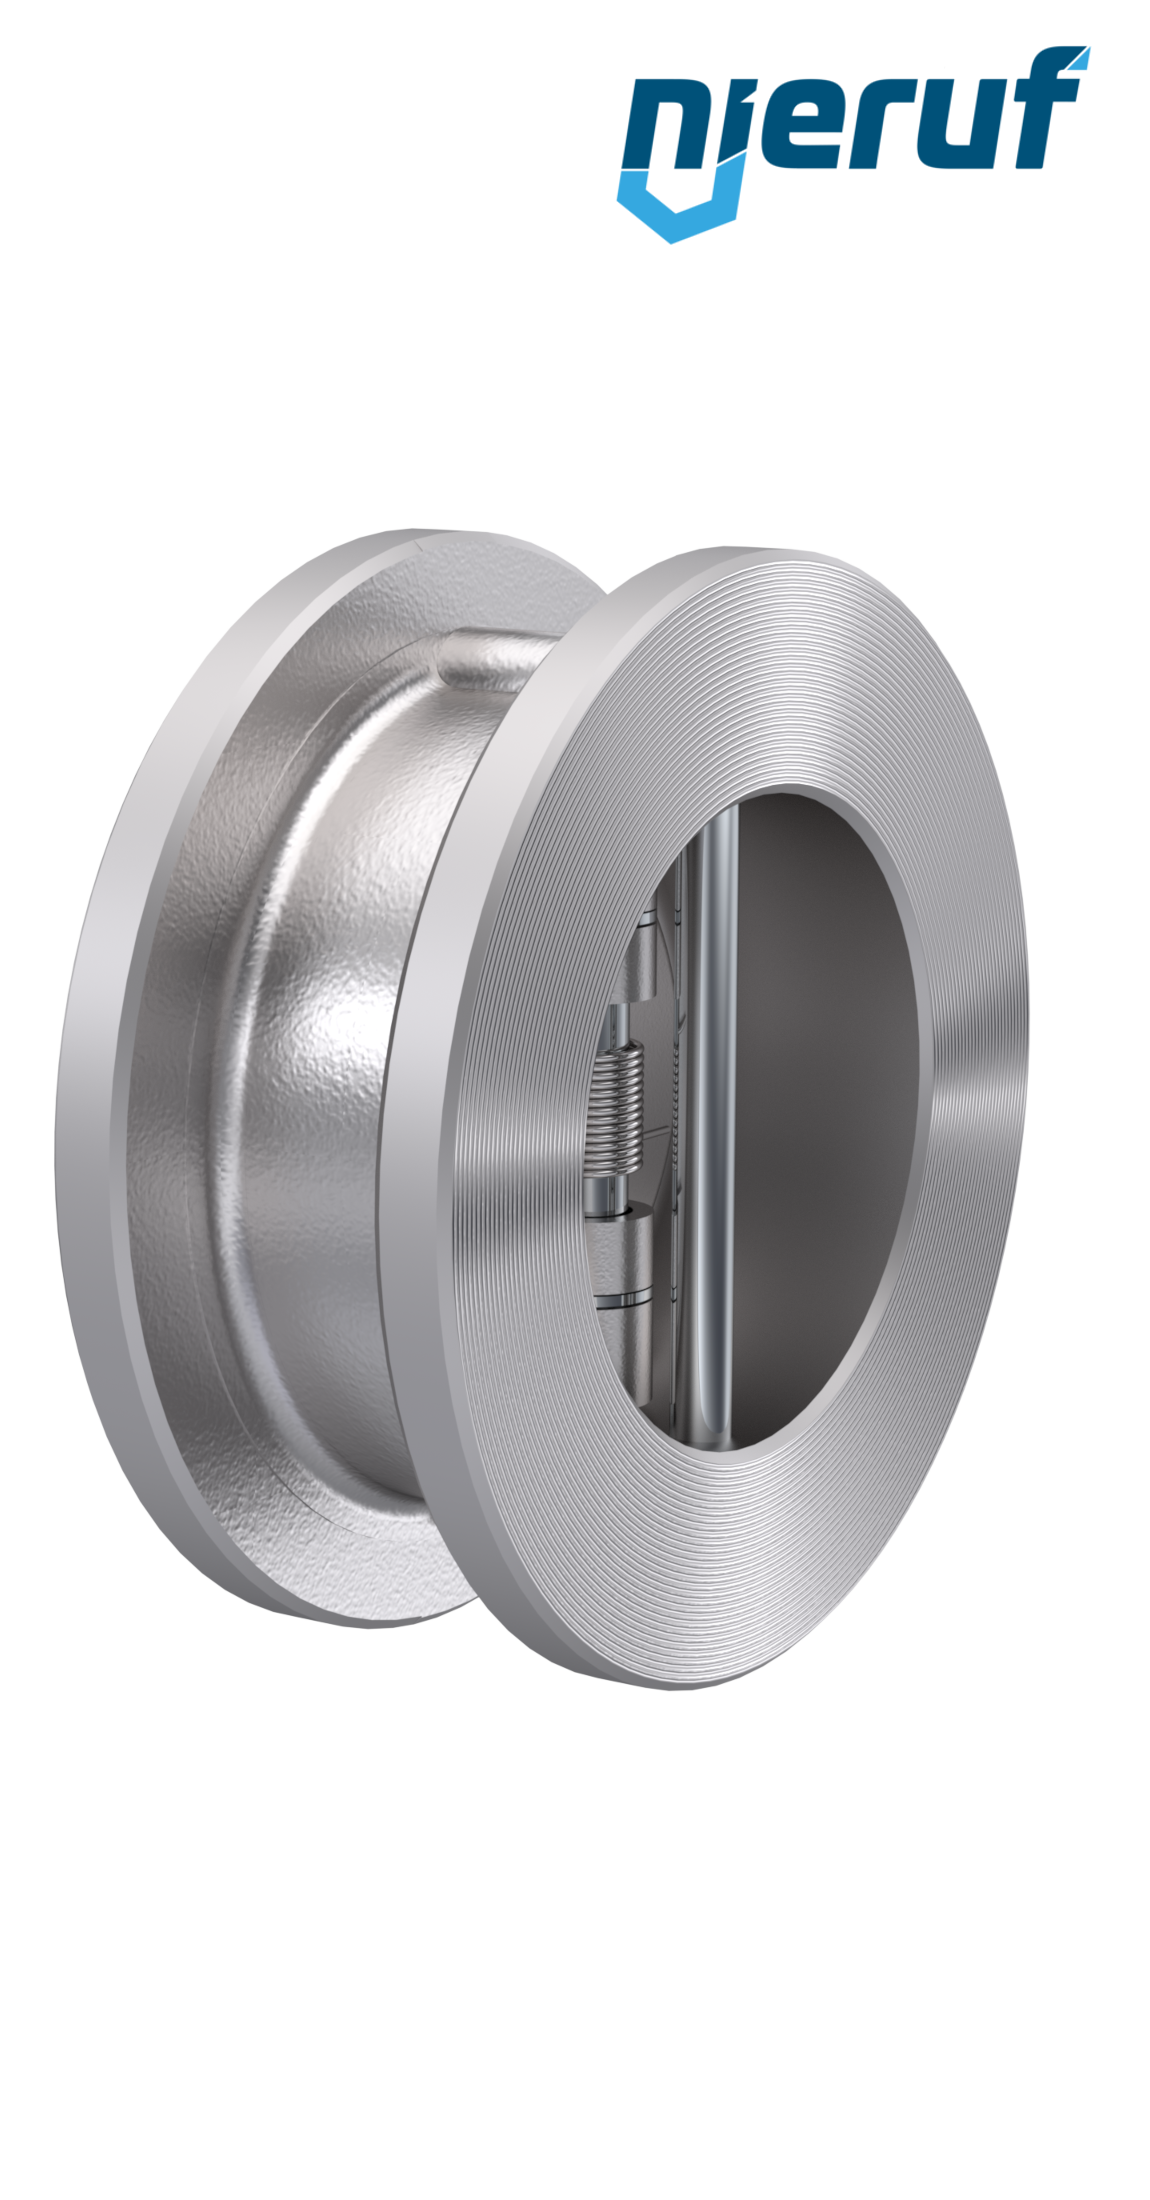 dual plate check valve DN80 DR03 stainless steel 1.4408 metal